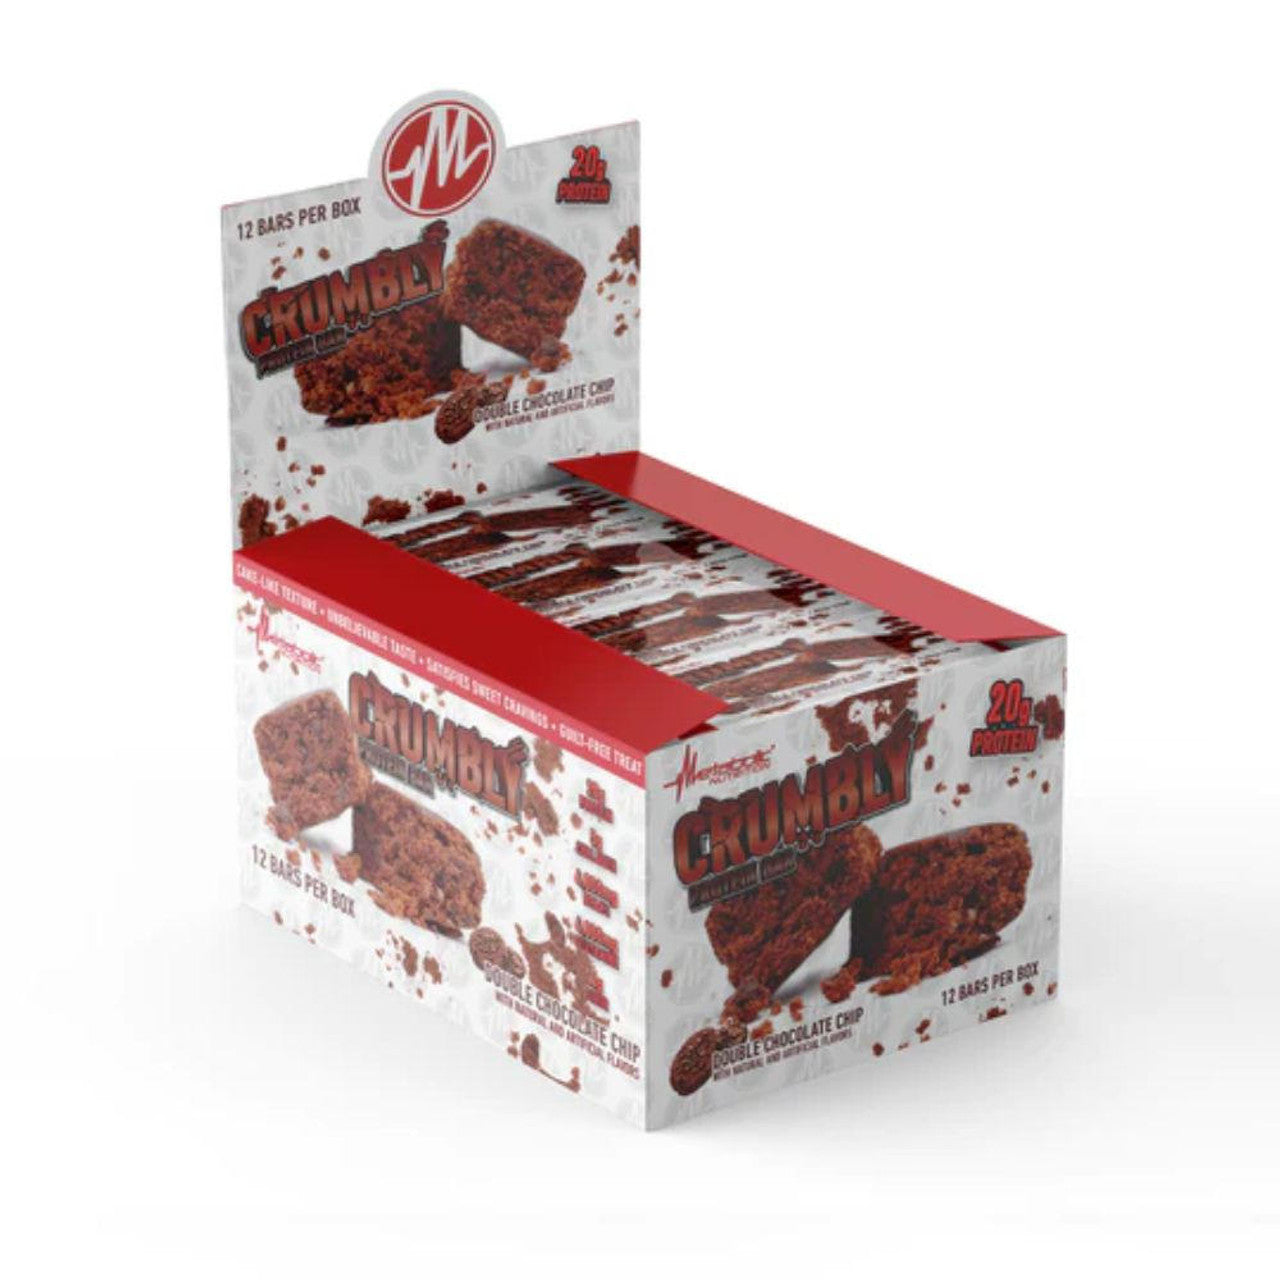 Metabolic Nutrition | Crumbly Protein Bar (12 Bars Per Box)